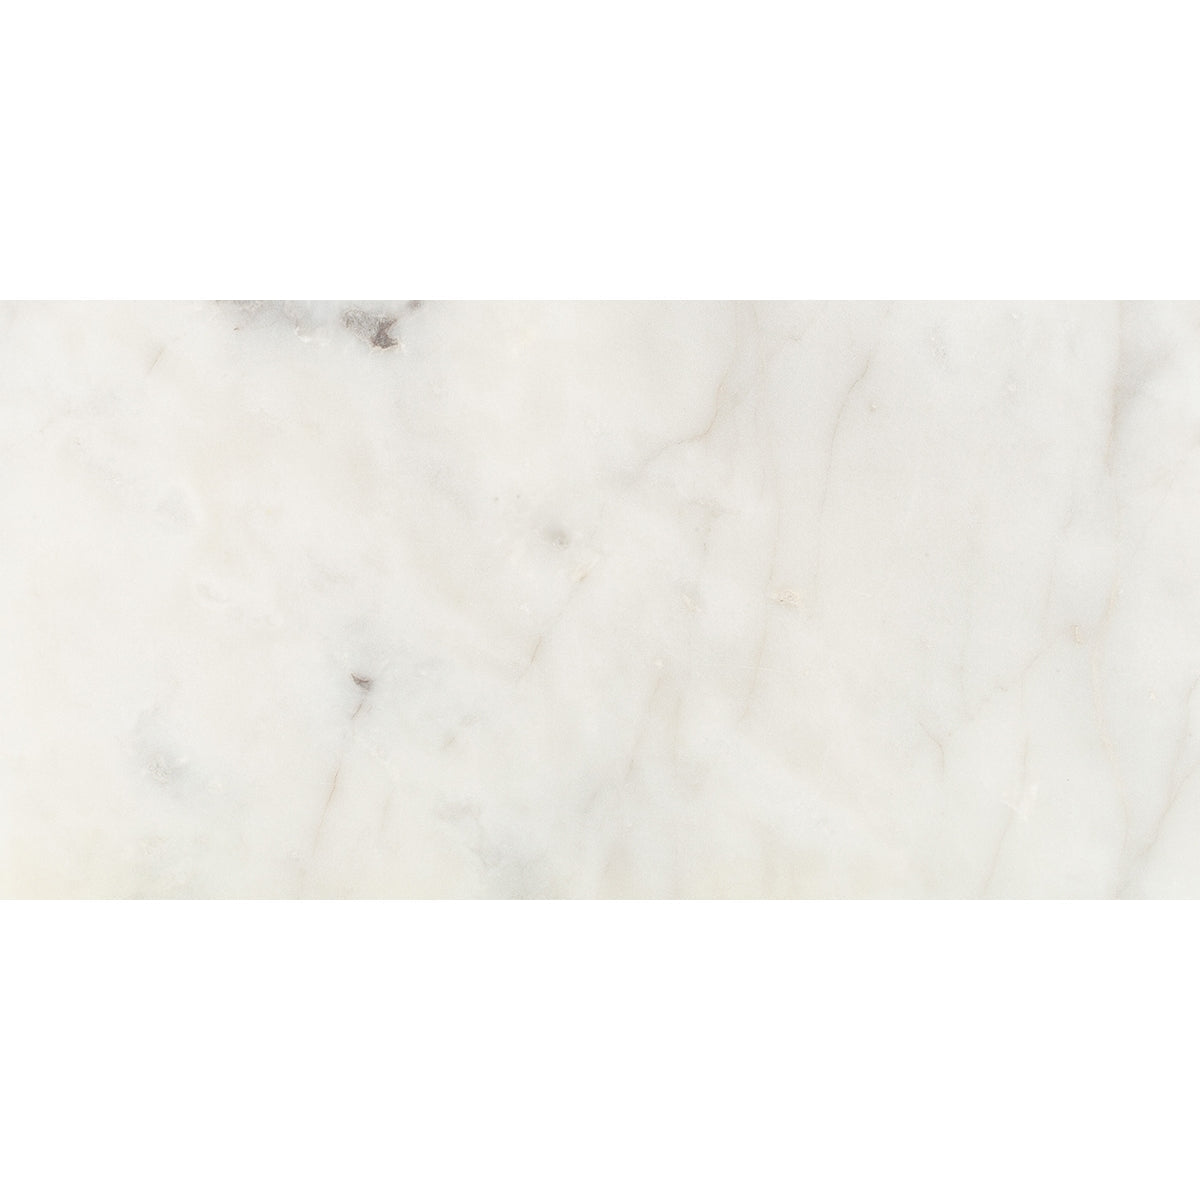 white pearl marble natural stone field tile rectangle shape honed finish 12 by 24 by 3 of 8 straight edge for interior and exterior applications in shower kitchen bathroom backsplash floor and wall produced by marble systems and distributed by surface group international